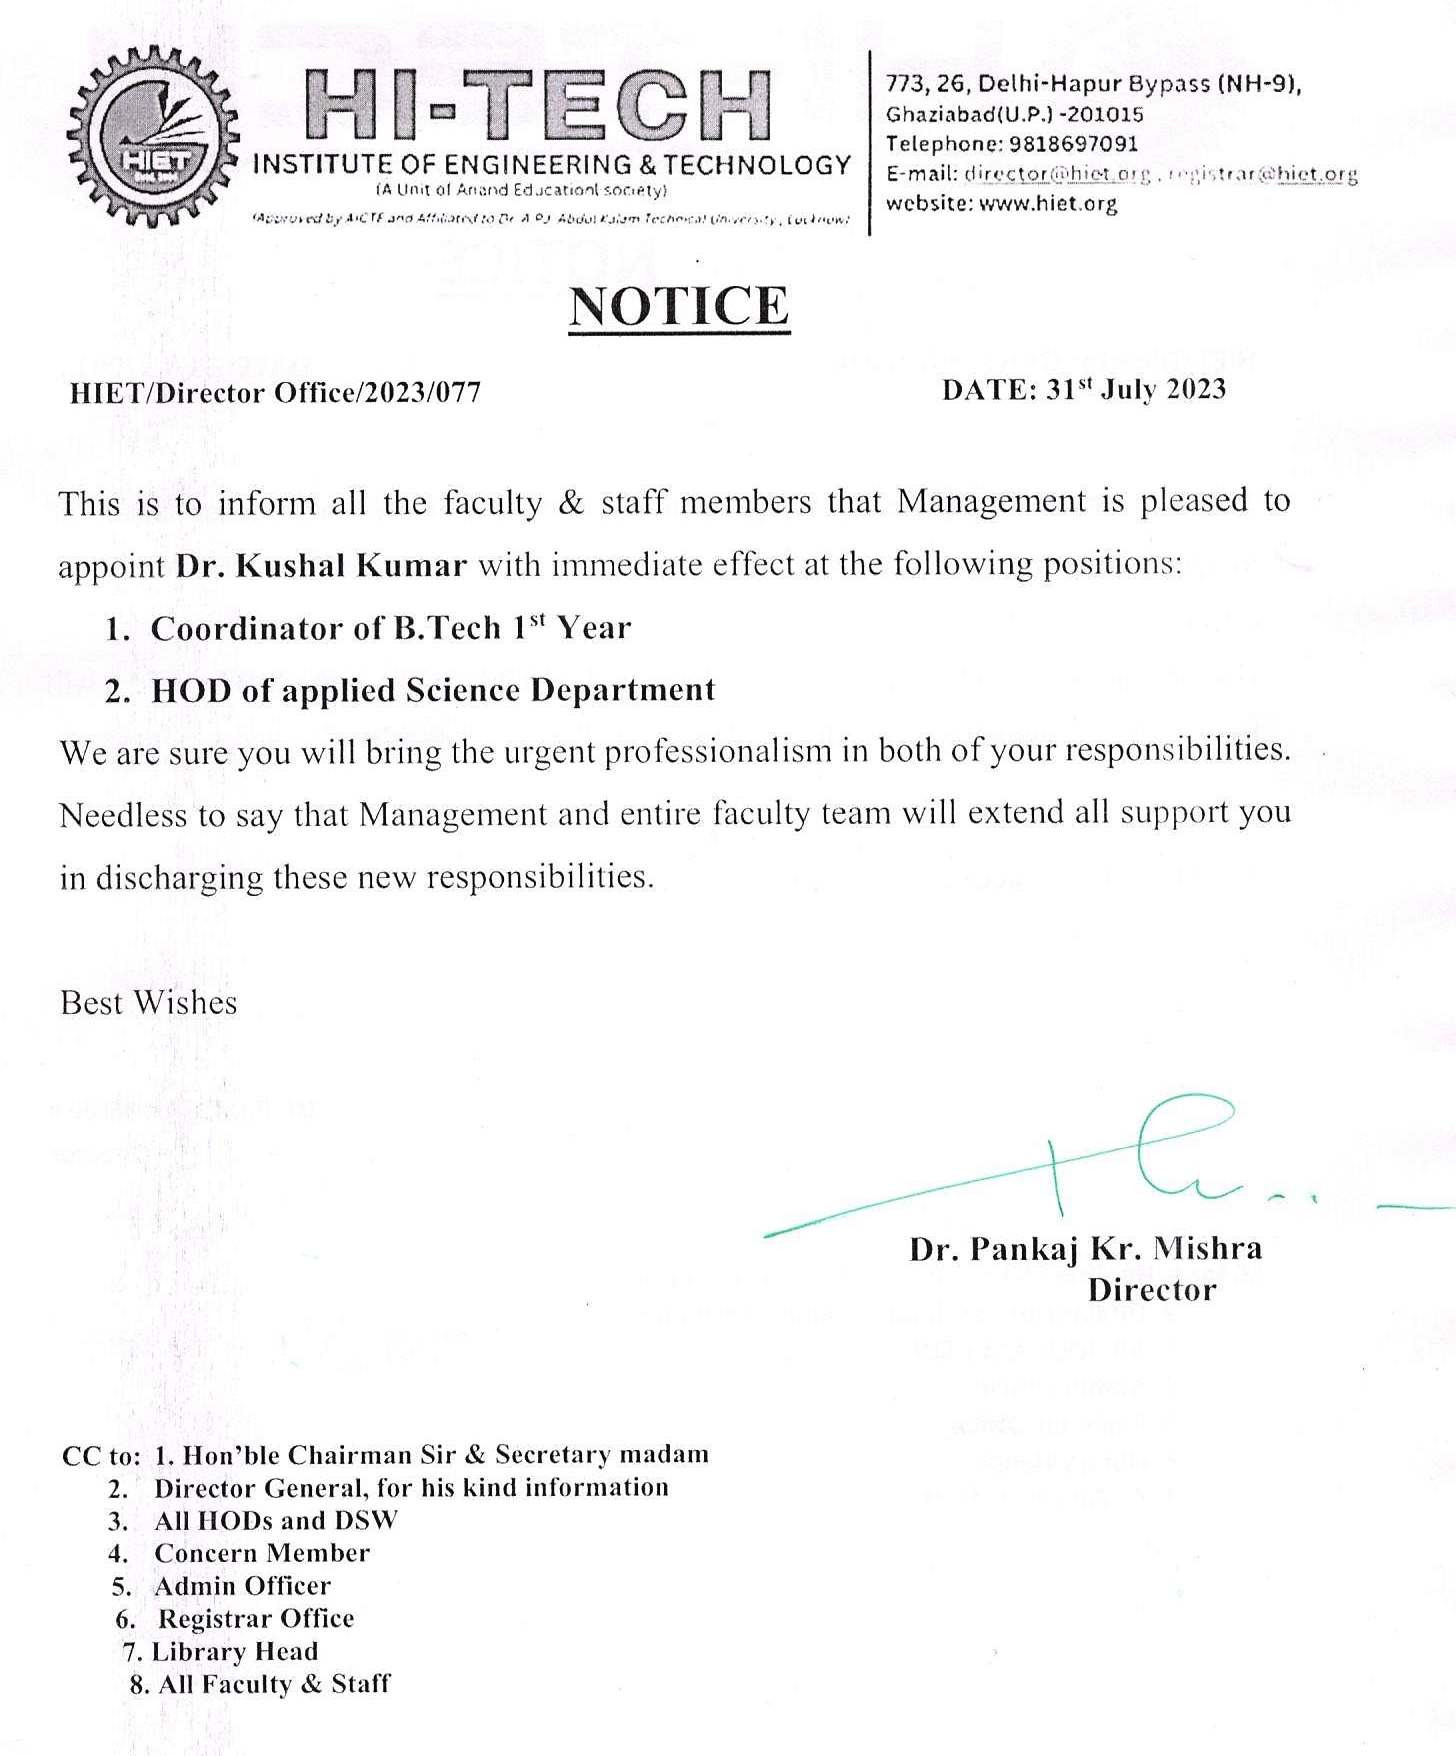 Dr. Kushal Kumar appointed HoD of Applied Sciences Department